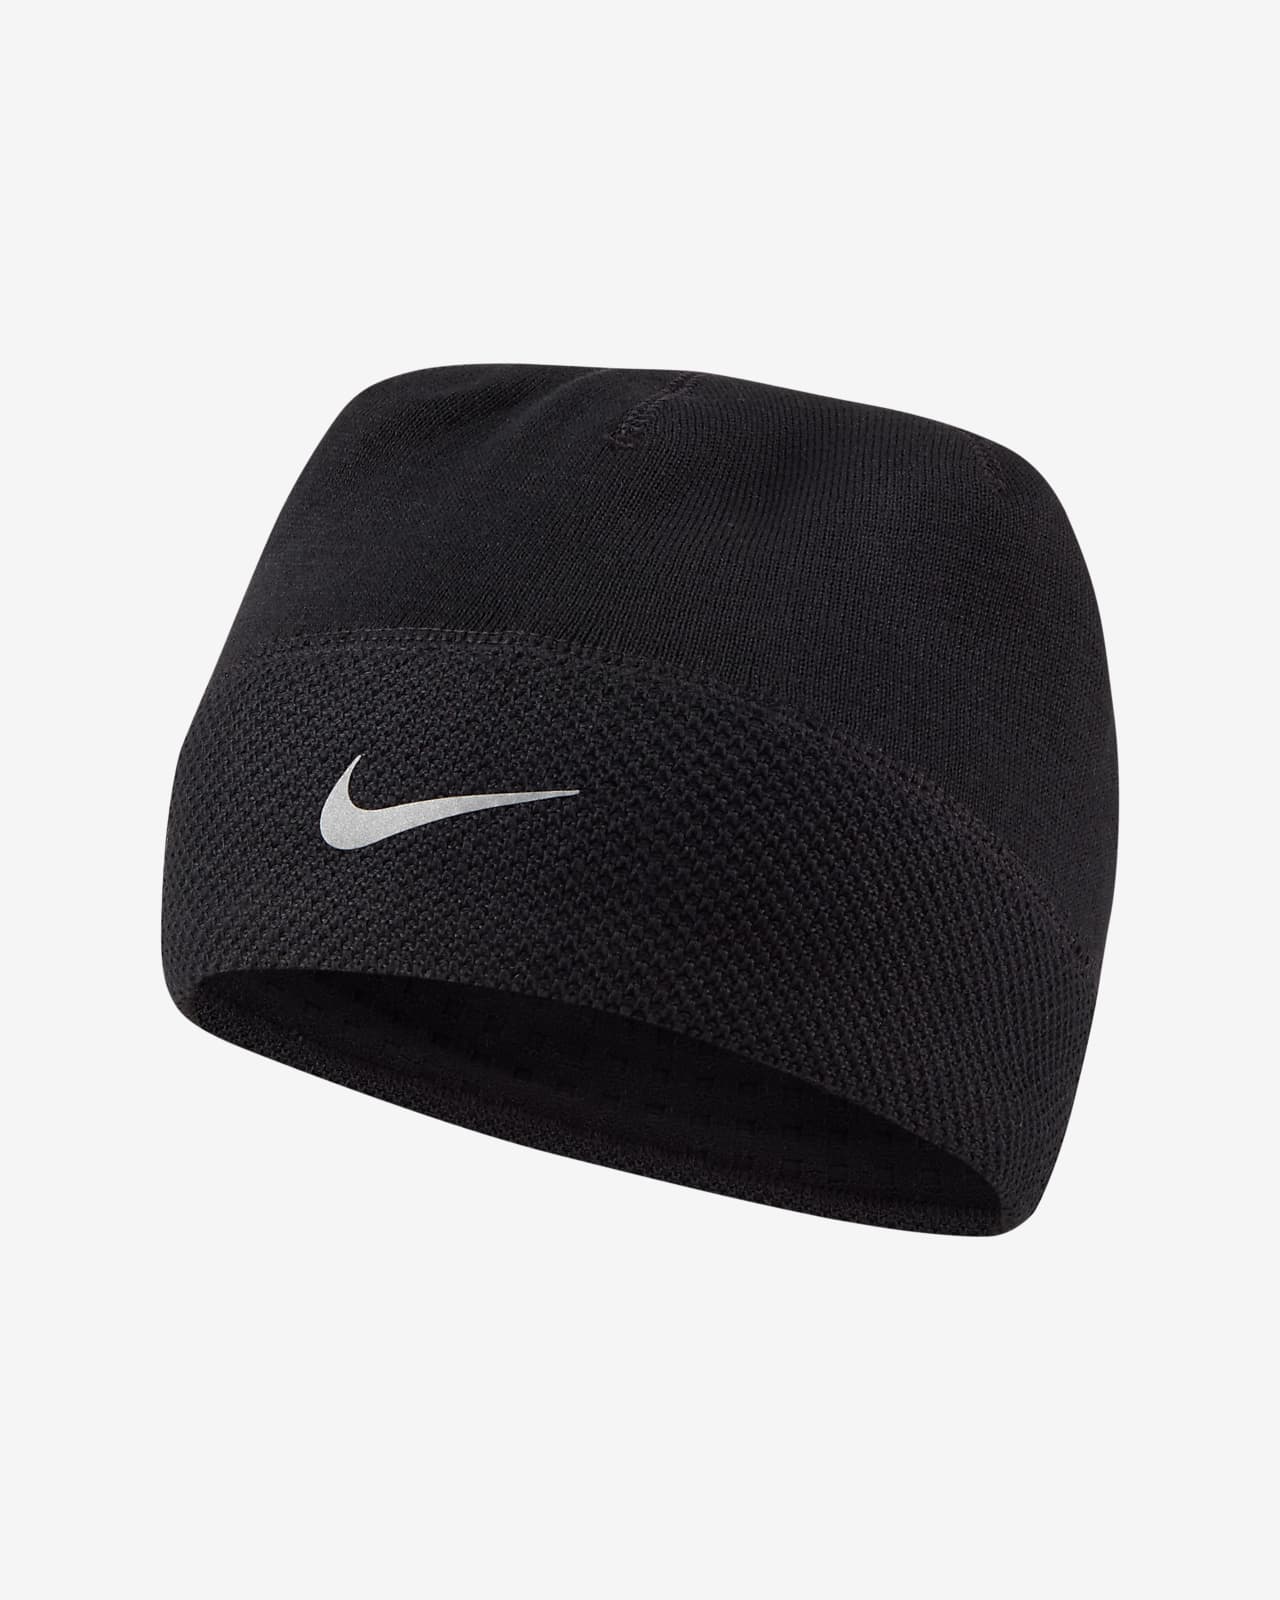 https://static.nike.com/a/images/t_PDP_1280_v1/f_auto,q_auto:eco/34b022ac-fcf7-4334-a46b-1a46f76b76f9/running-beanie-BrnZZ7.png